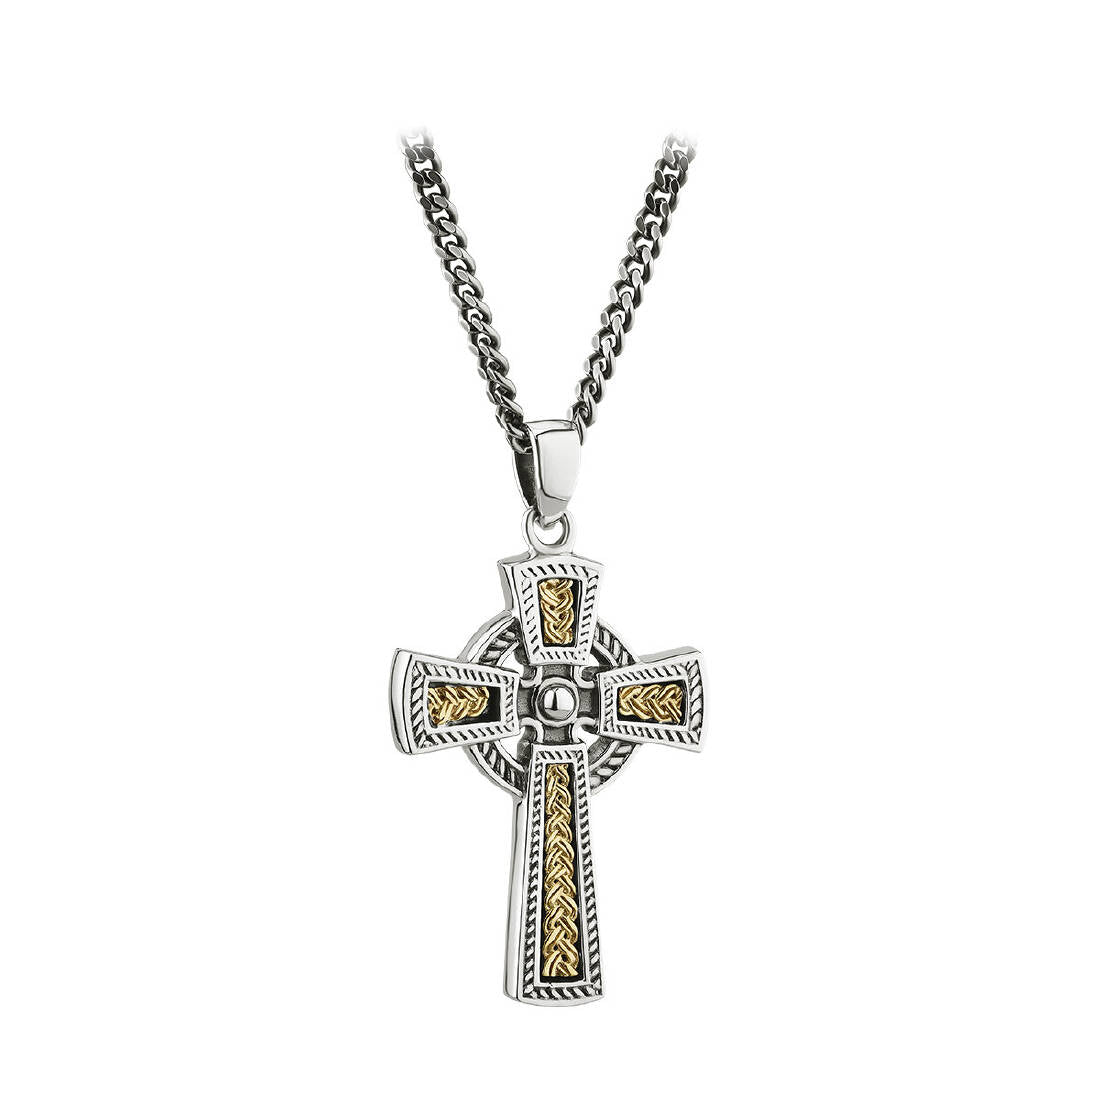 Men's Gold and Silver Oxidized Celtic Cross Pendant Necklace